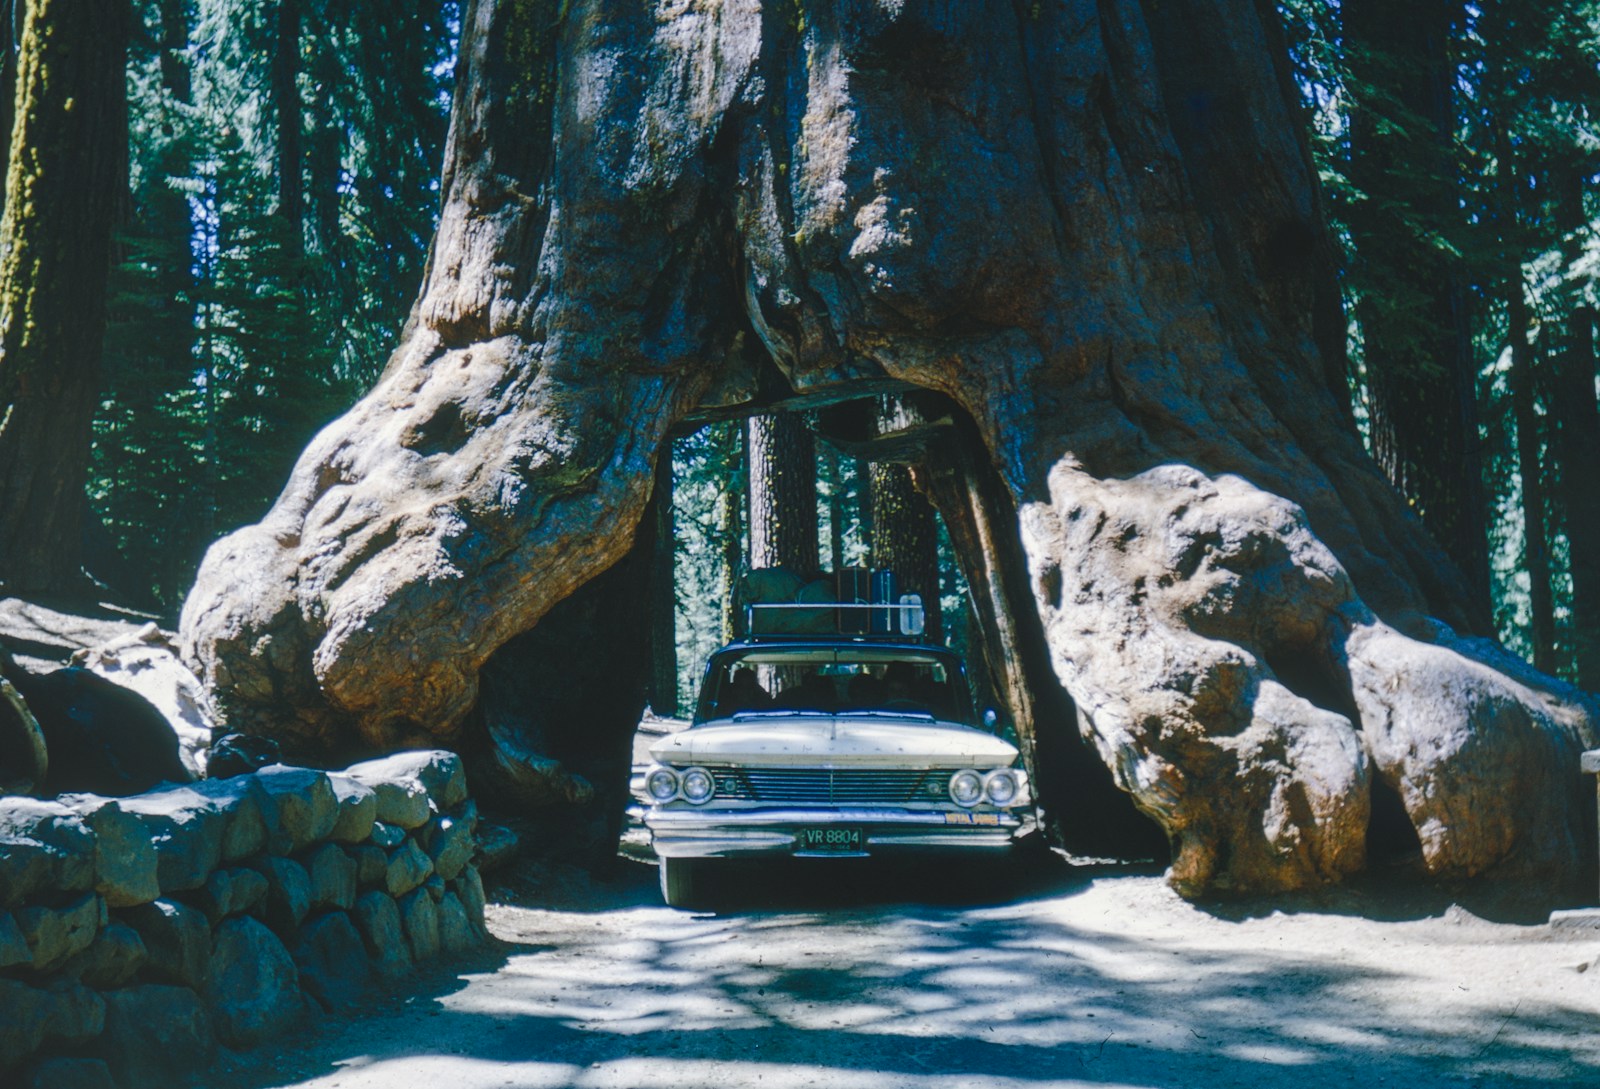 a car is parked in front of a large tree